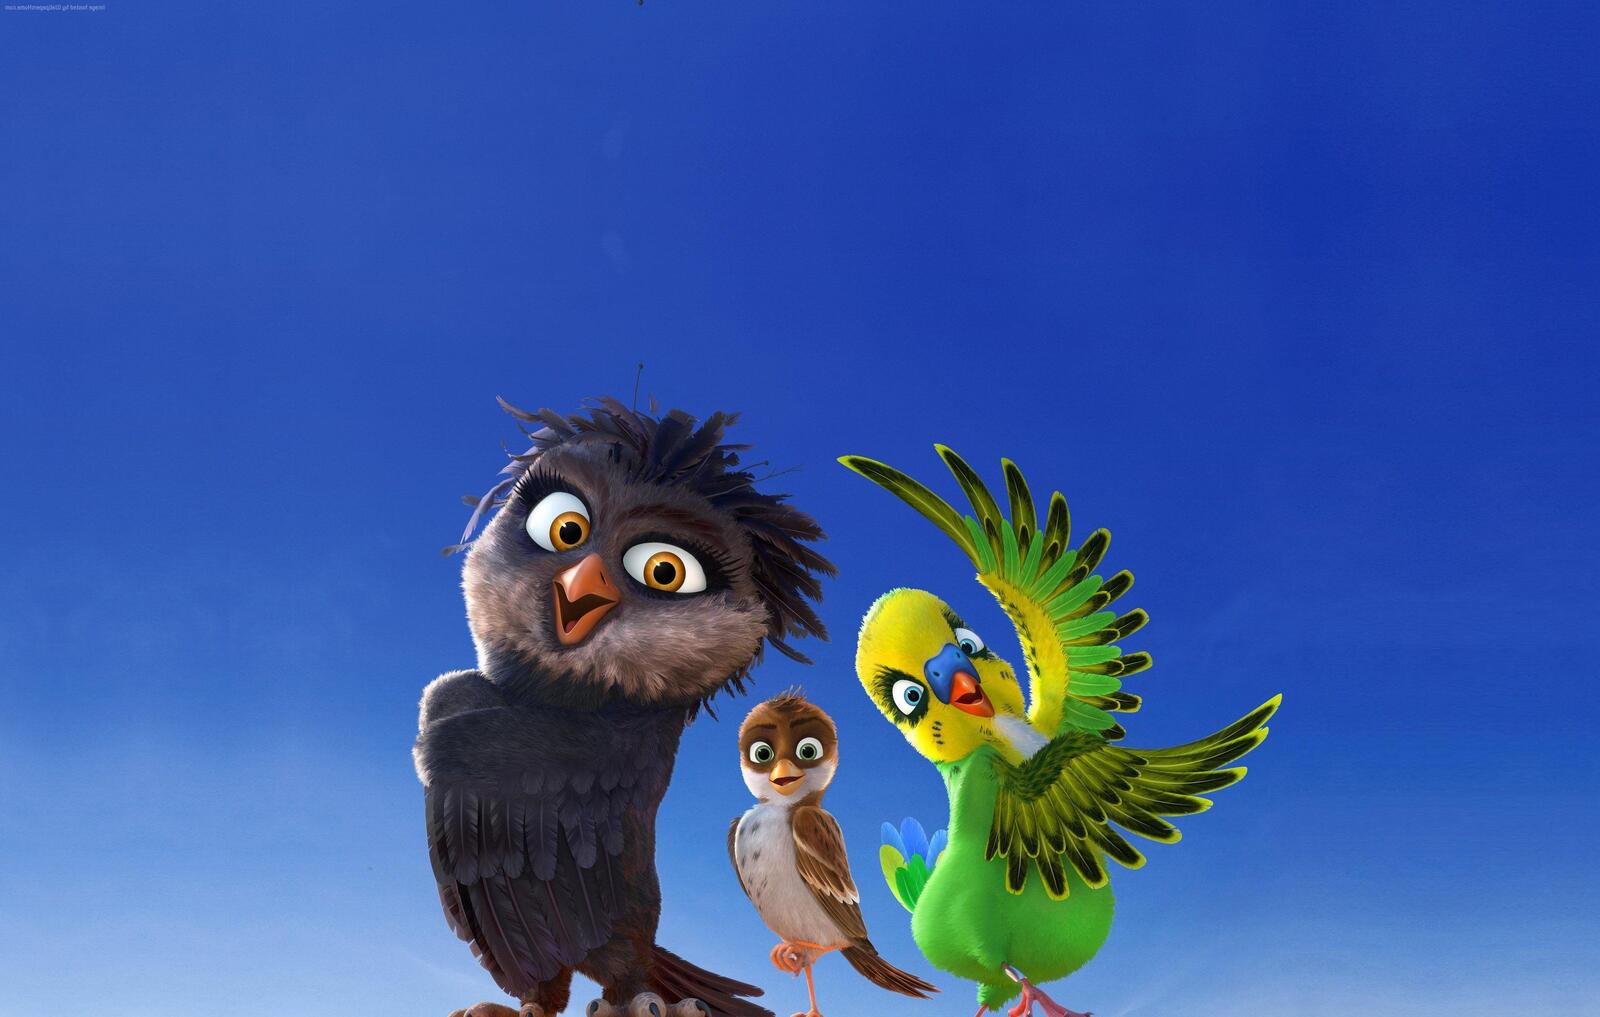 Wallpapers movies animated movies Richard The Stork on the desktop